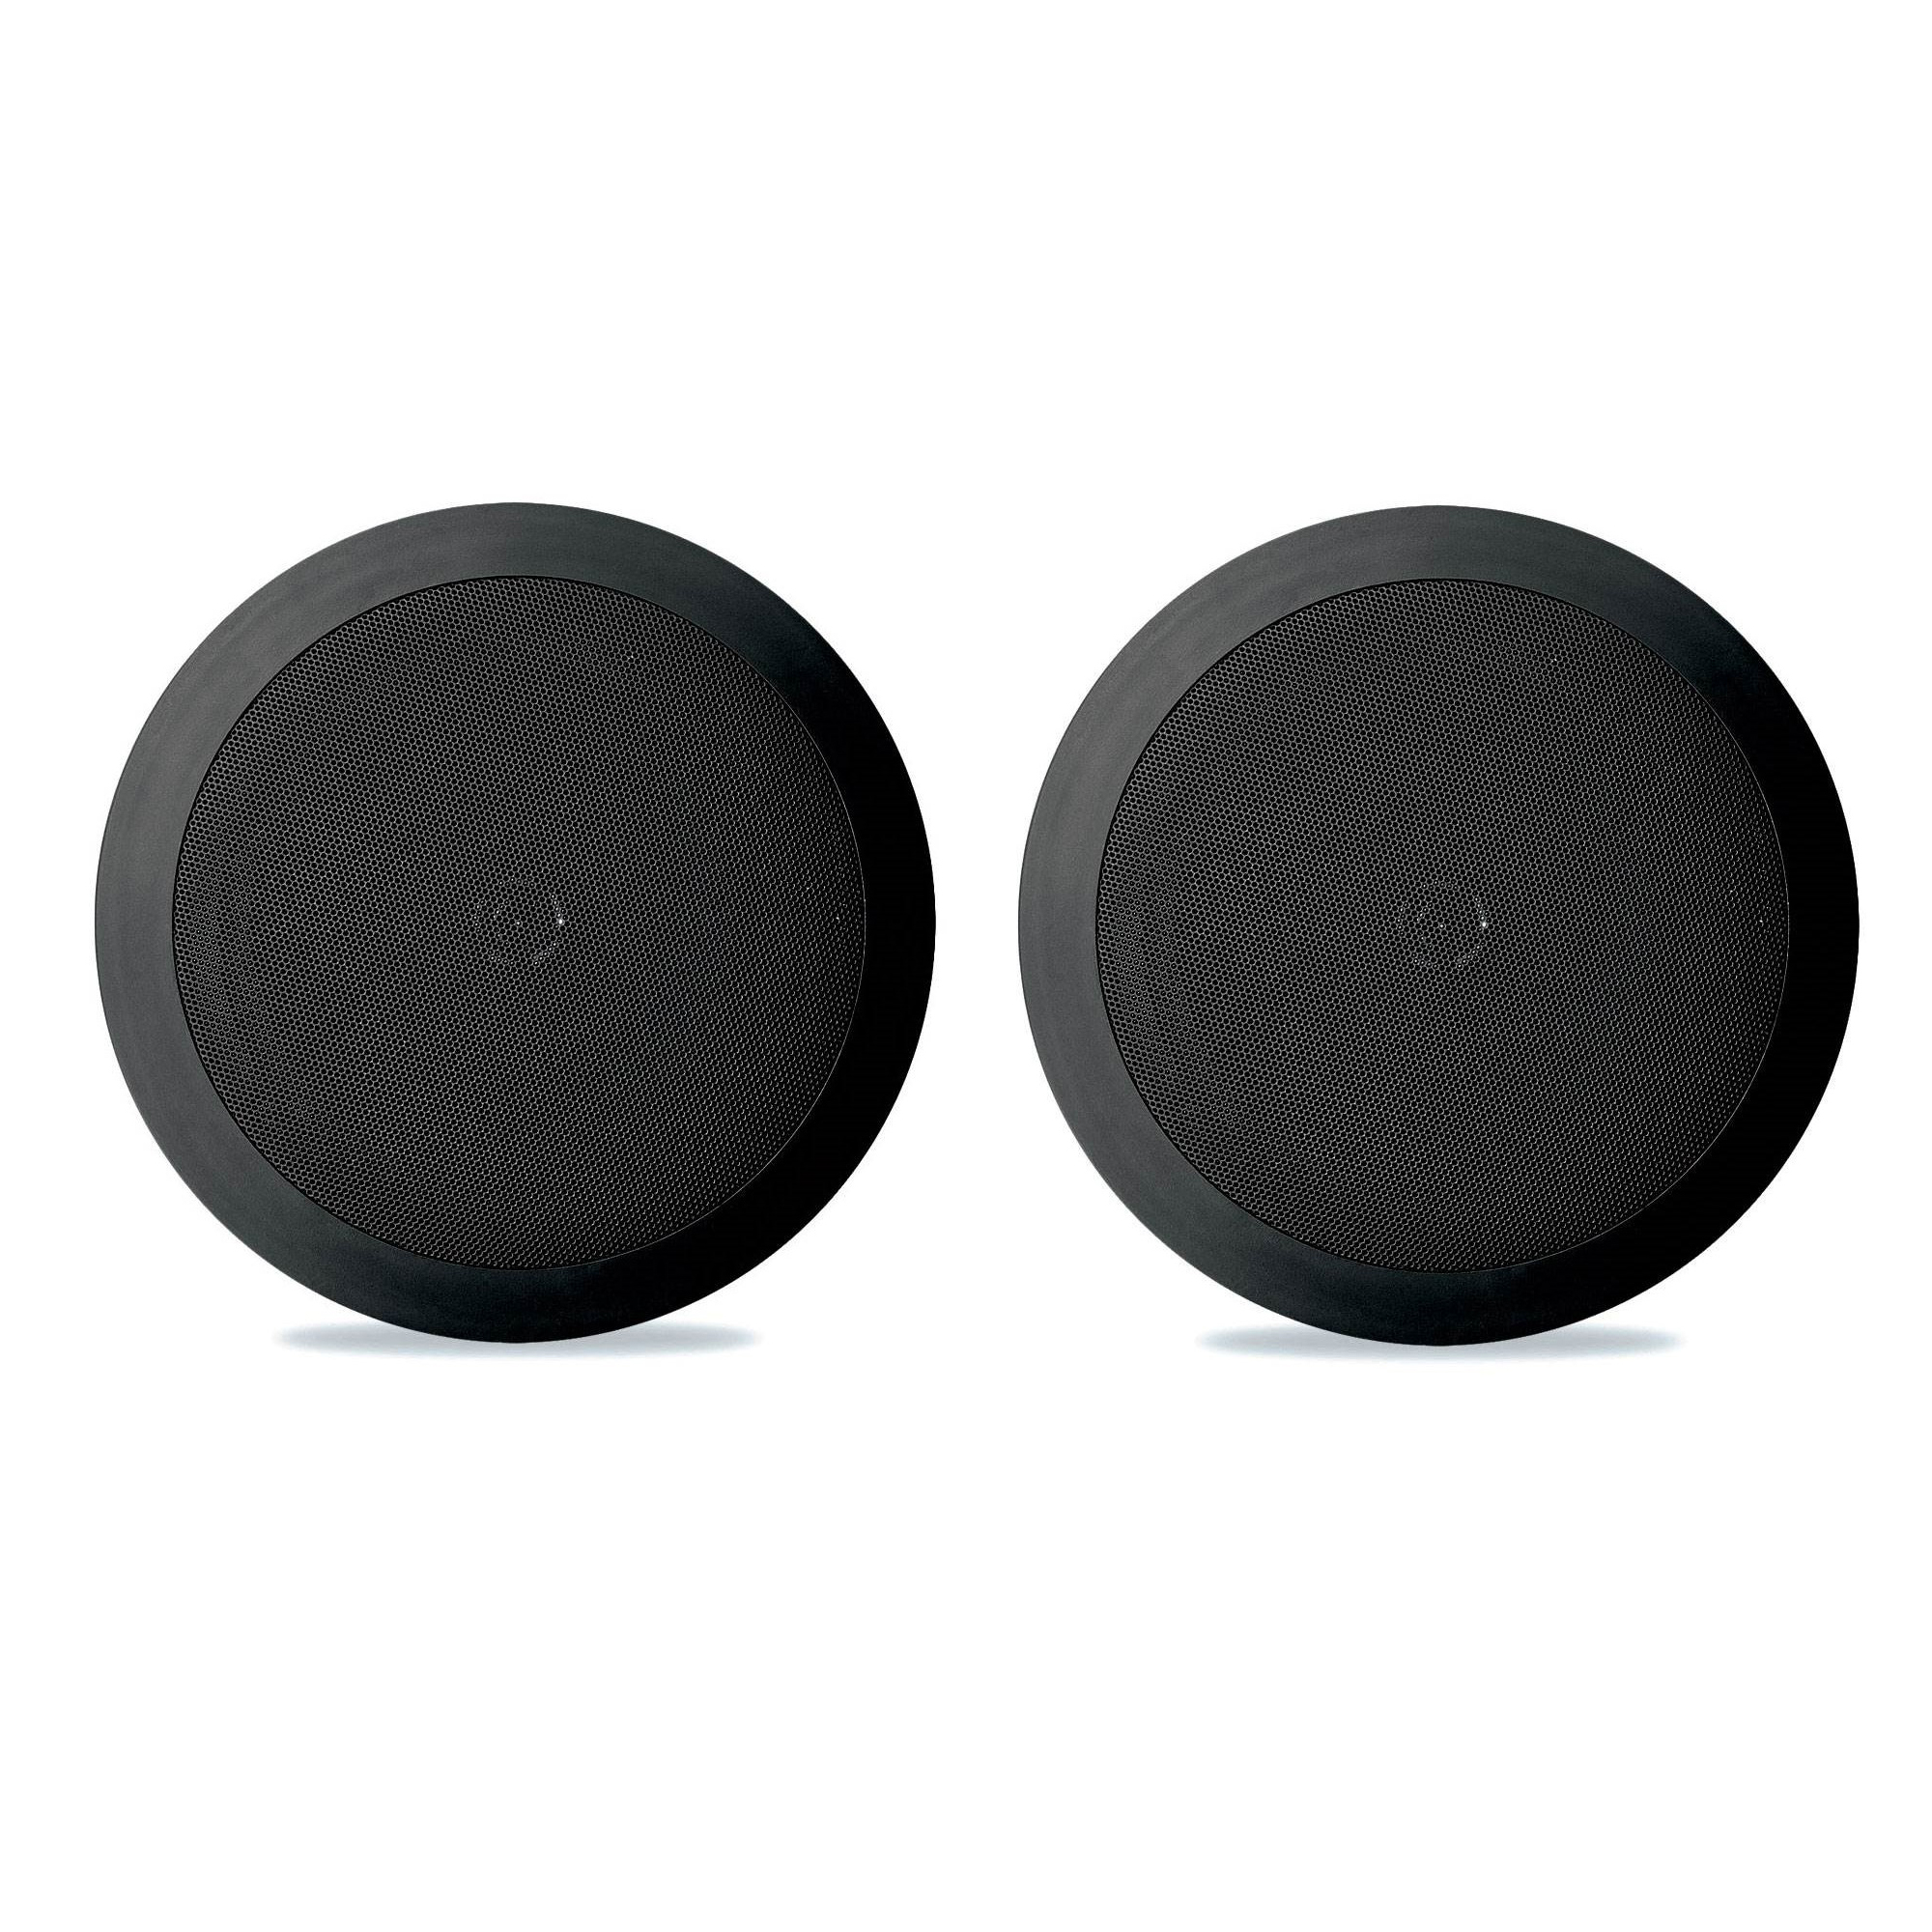 Pyle PDIC81RDBK 250W 8 Inch Flush In-Wall In-Ceiling Black Speakers (6 Pairs) - image 1 of 5